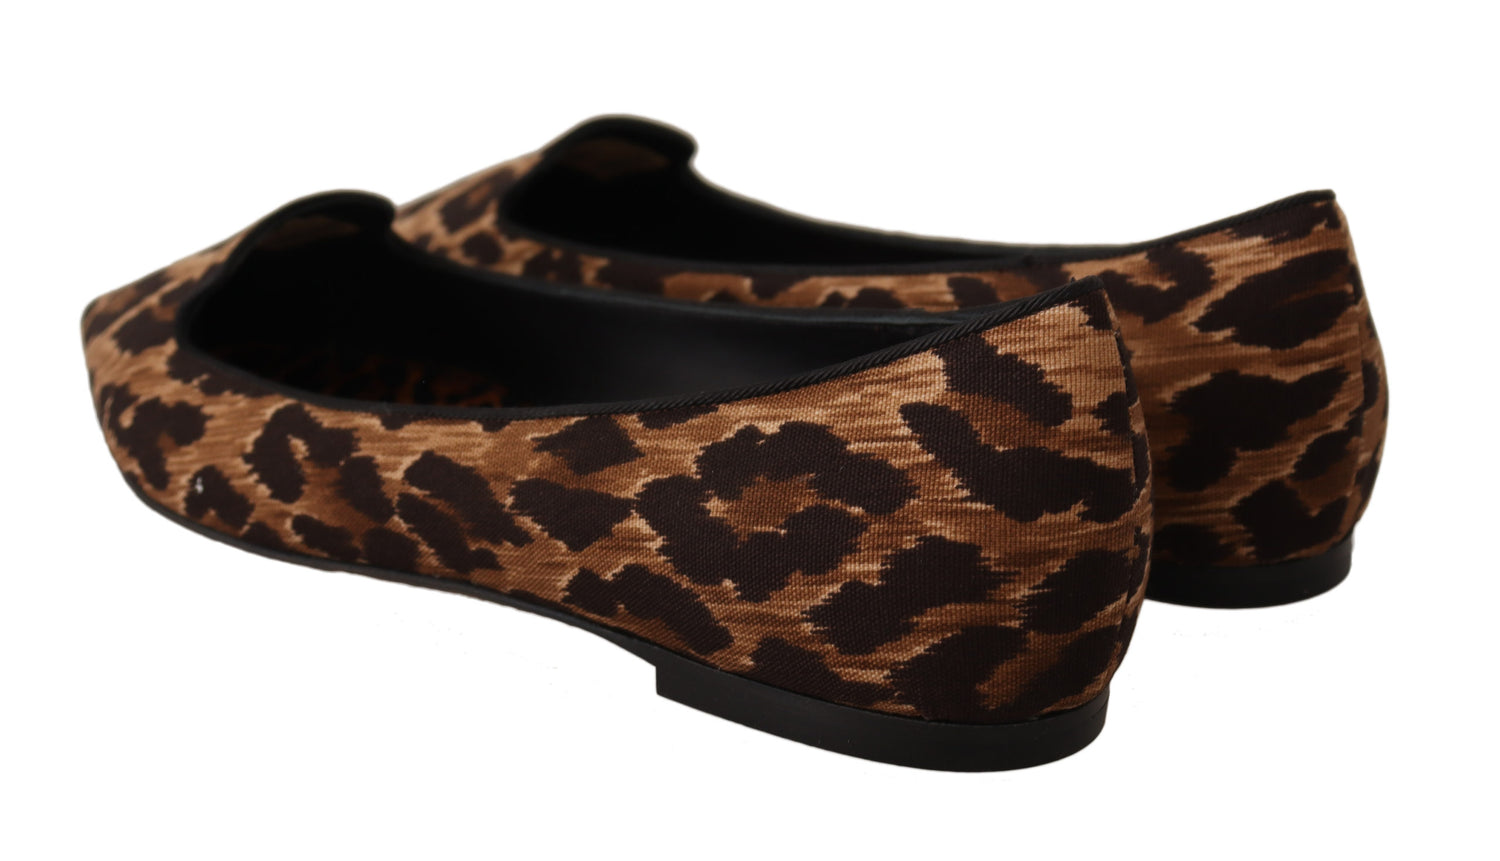 Brown Leopard Print Ballerina Loafers Shoes